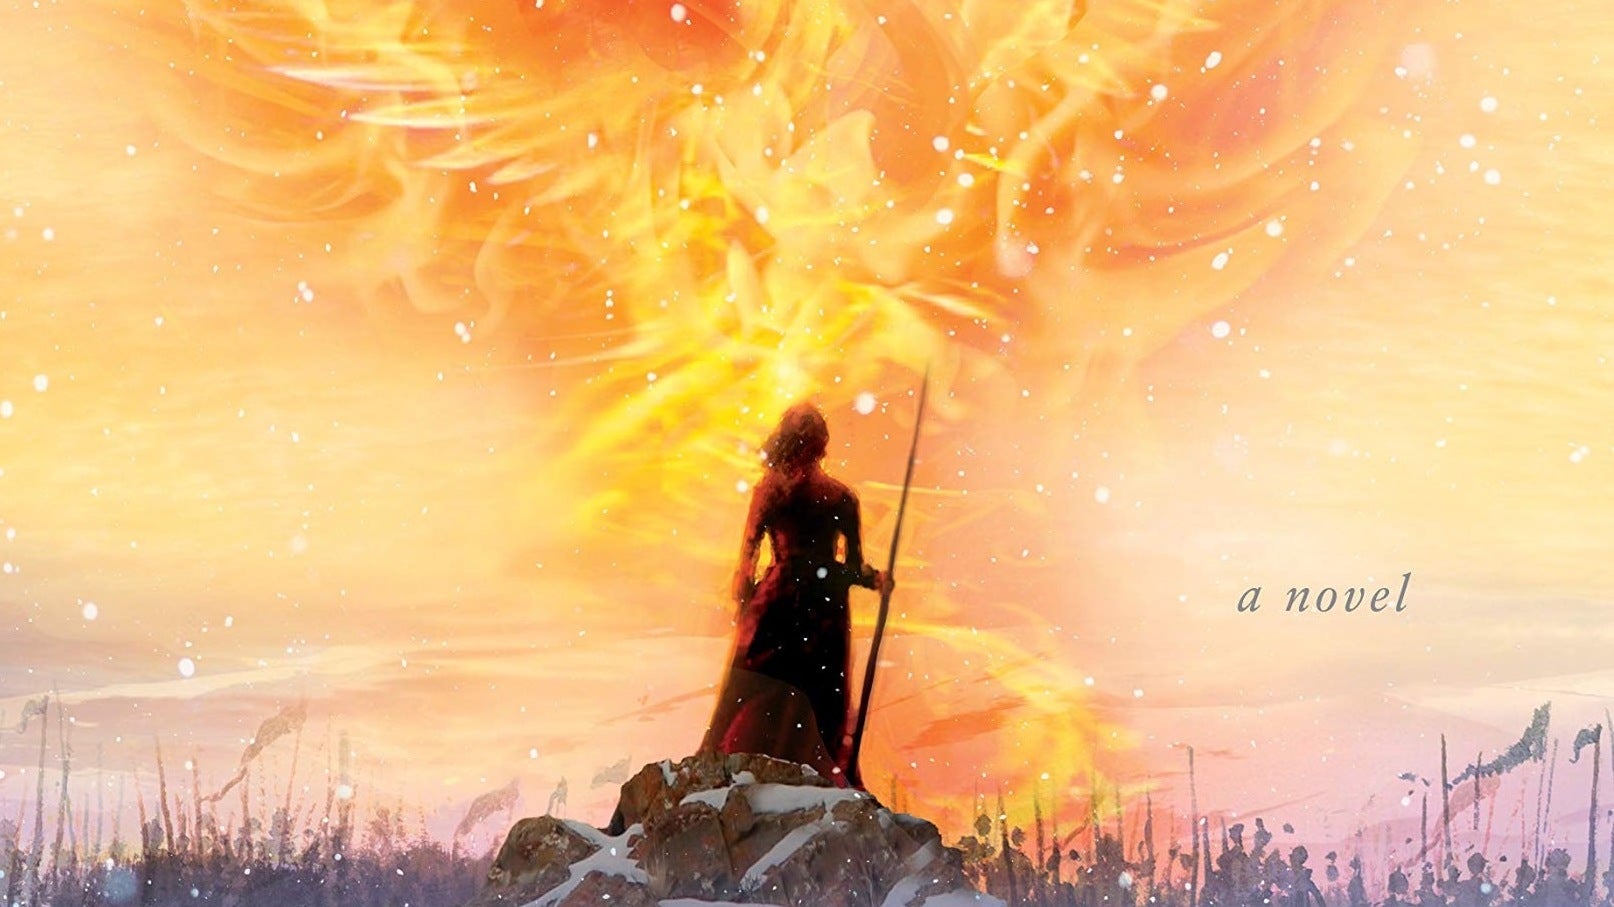 Get Started On Your 2019 Reading List With All These New Sci-Fi And Fantasy Books